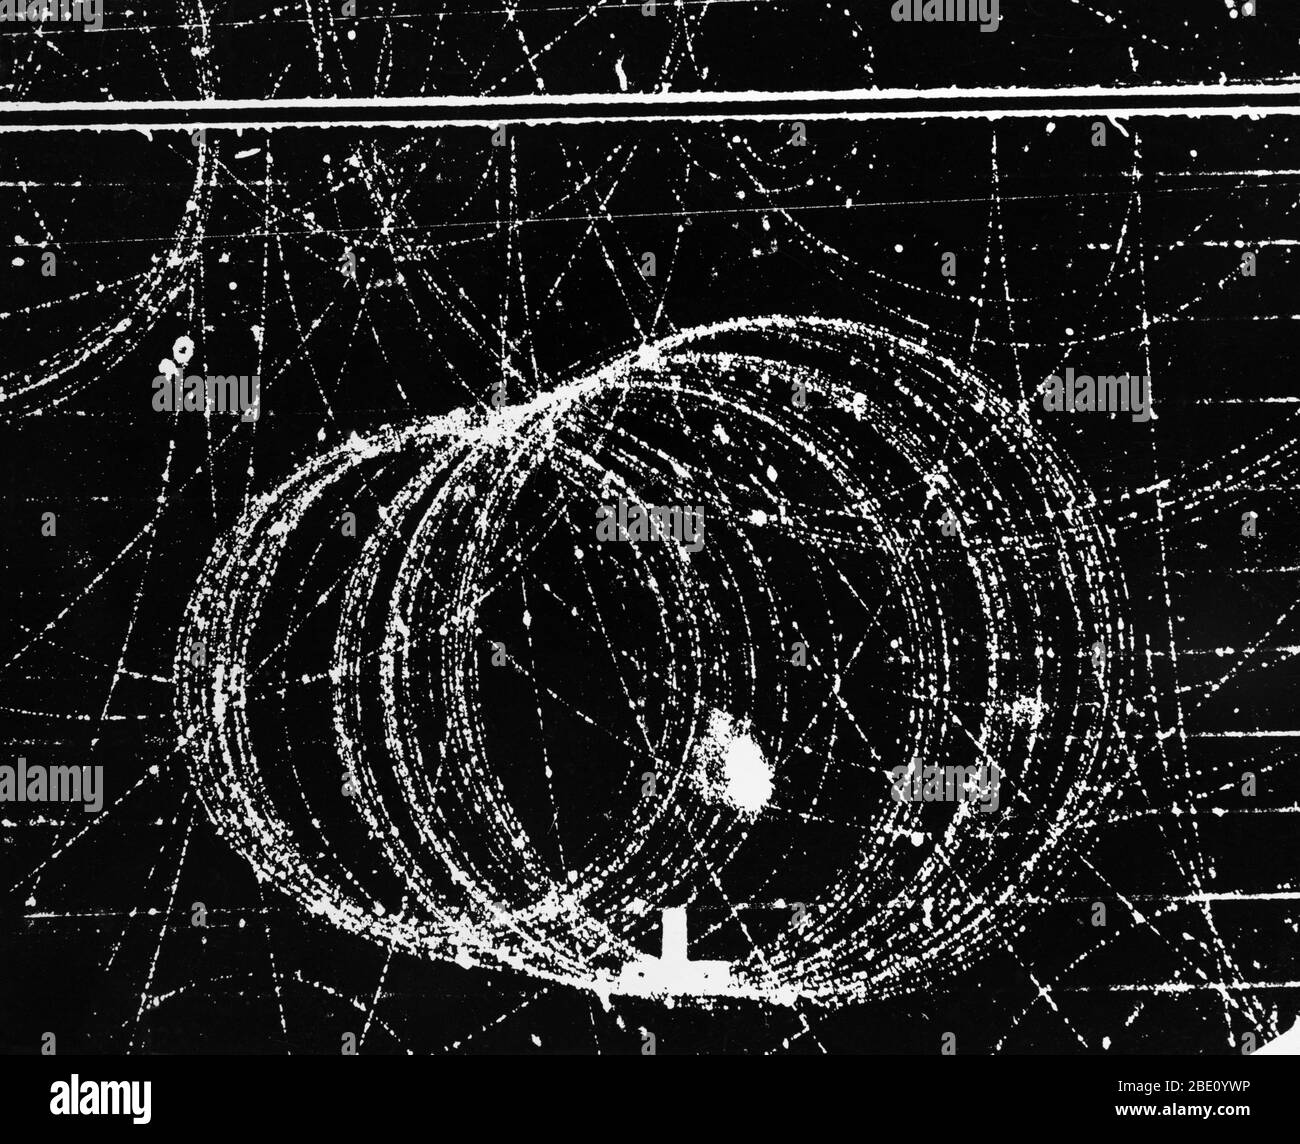 Circular track of 42 Meu positron in 12,000 gauss magnetic field. The path length of the positron track in this photograph is nearly 8 meters. Electron and positron spiral tracks seen in a cloud chamber at the Lawrence Berkeley Laboratory, California. The electron and positron started their lives at the bottom of the frame; they were generated by a gamma ray entering from the right. The positron, which is an electron with a positive charge, spirals (larger loops) towards the bottom left corner while the electron's smaller loops move upwards. The other tracks crossing the frame are also due to Stock Photo